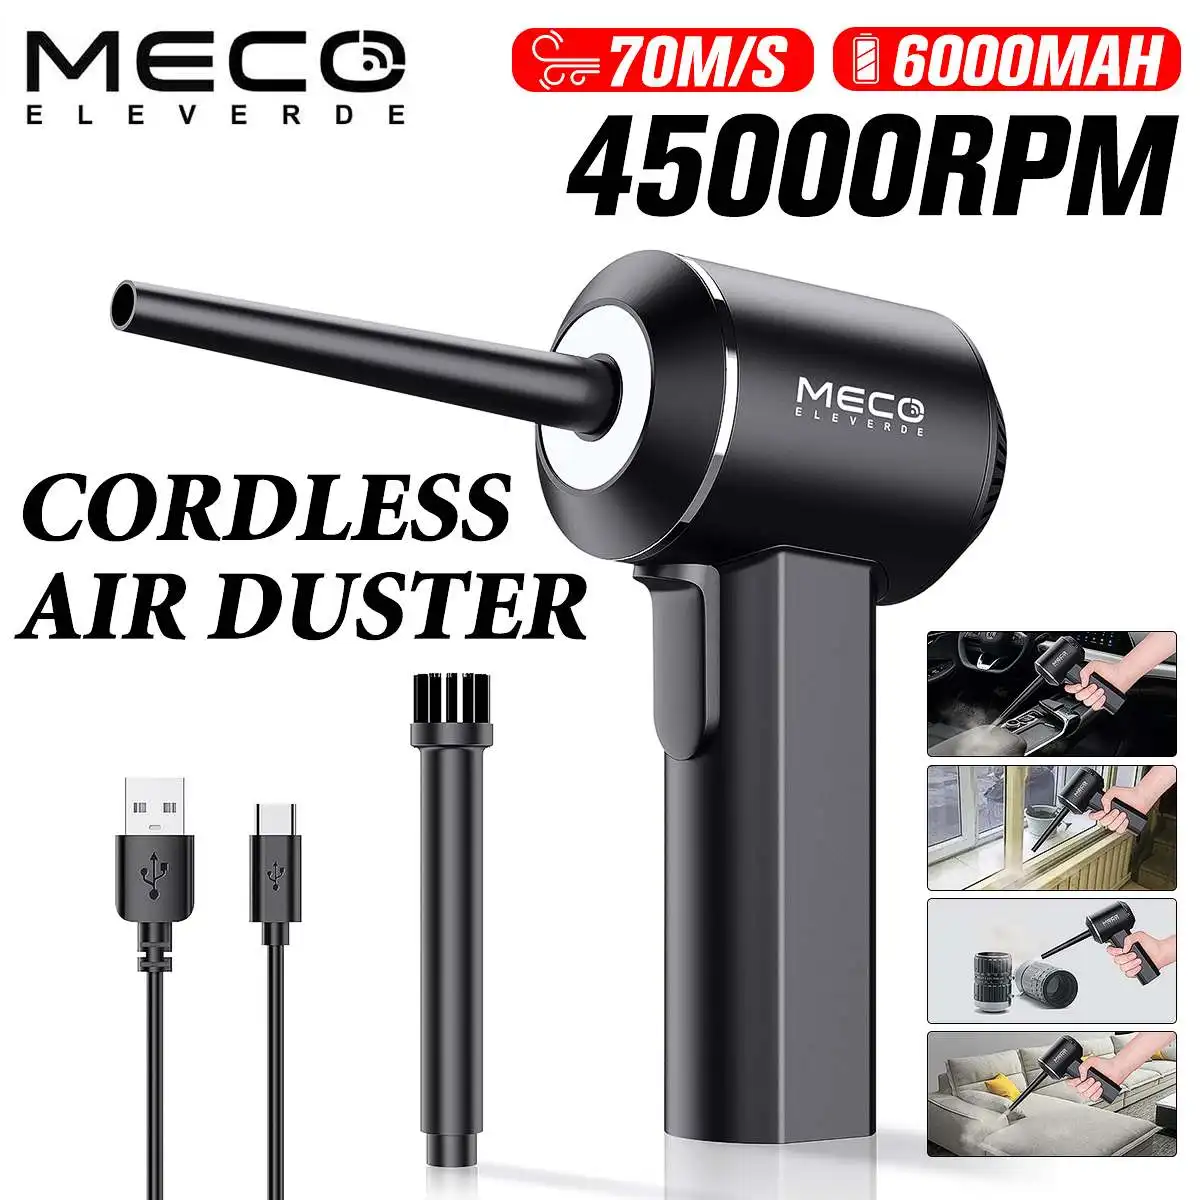 

MECO Wireless Air Duster USB Vacuum Cleaner Blower Handheld Compressed Cordless Tool PC Laptop Car Keyboard 6000mAh 45000RPM